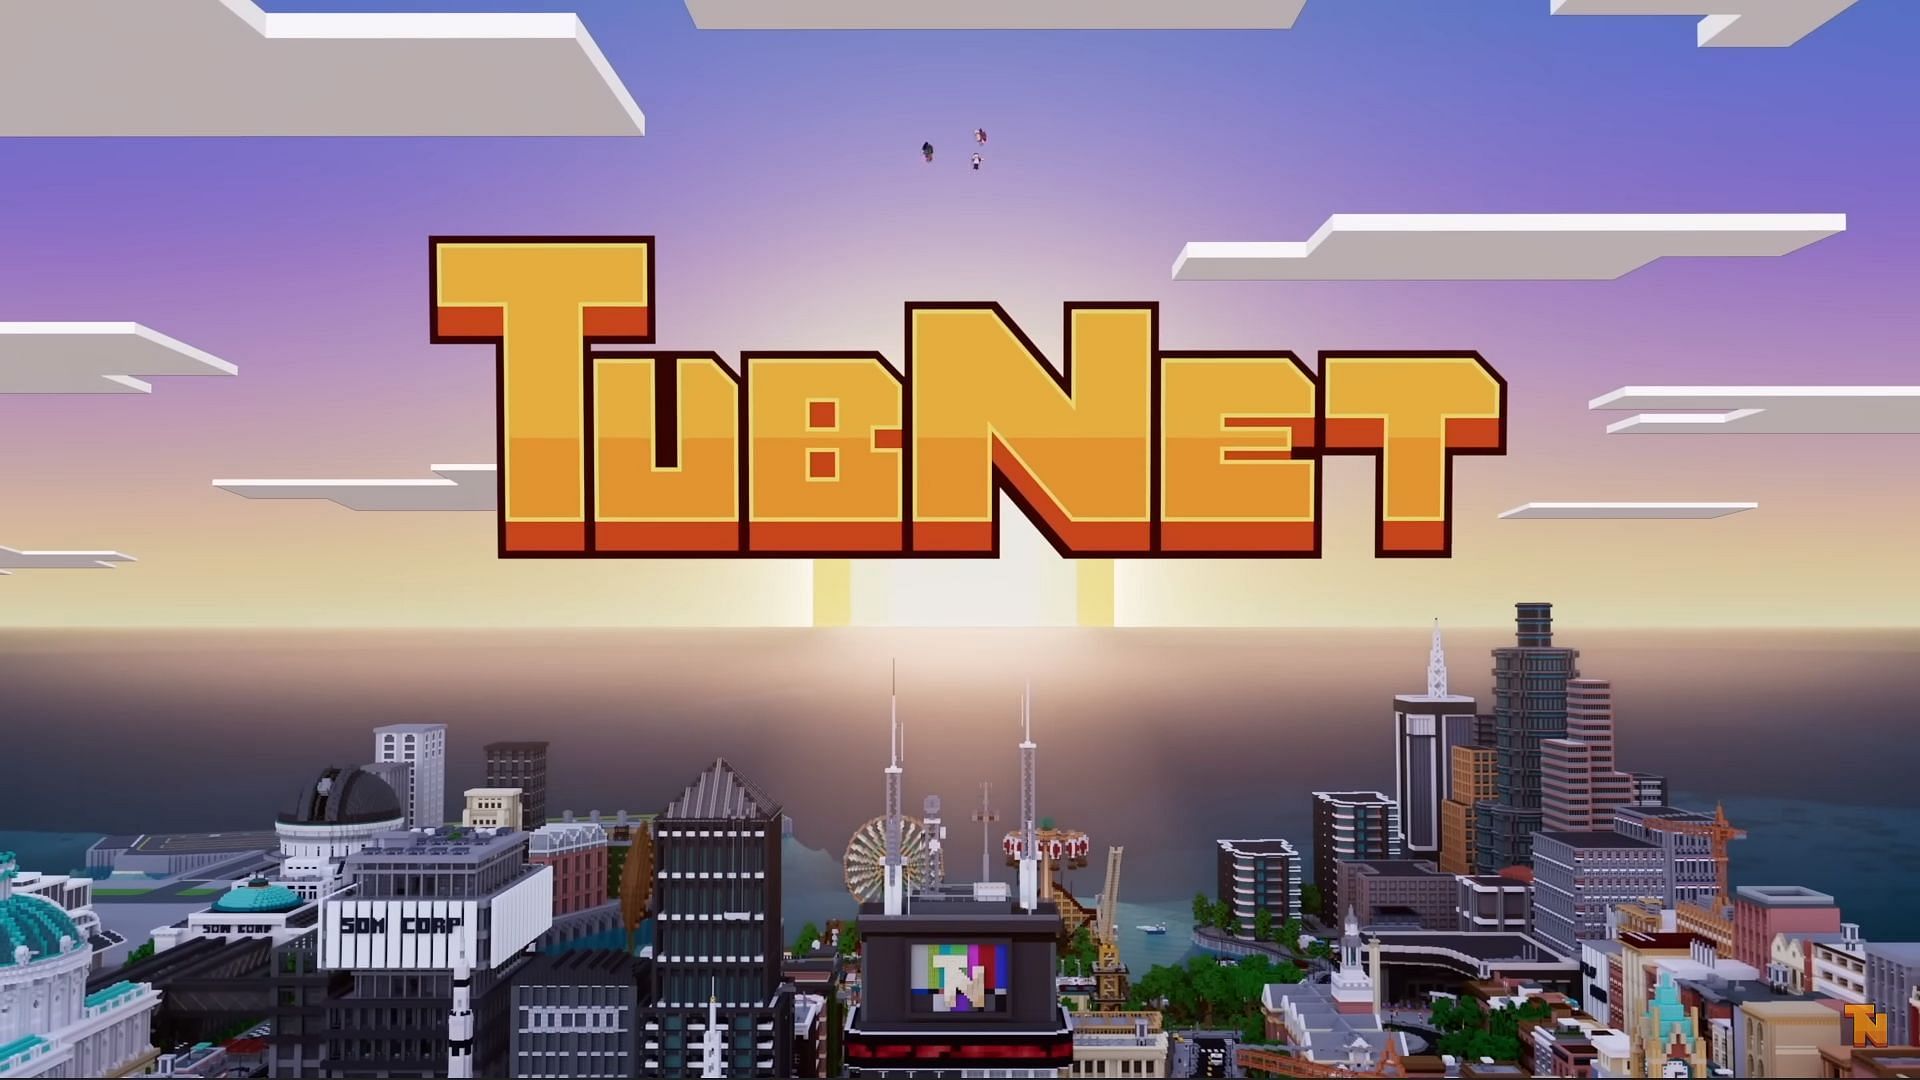 TubNet's announcement trailer has over three million views (Image via YouTube/TubNet)